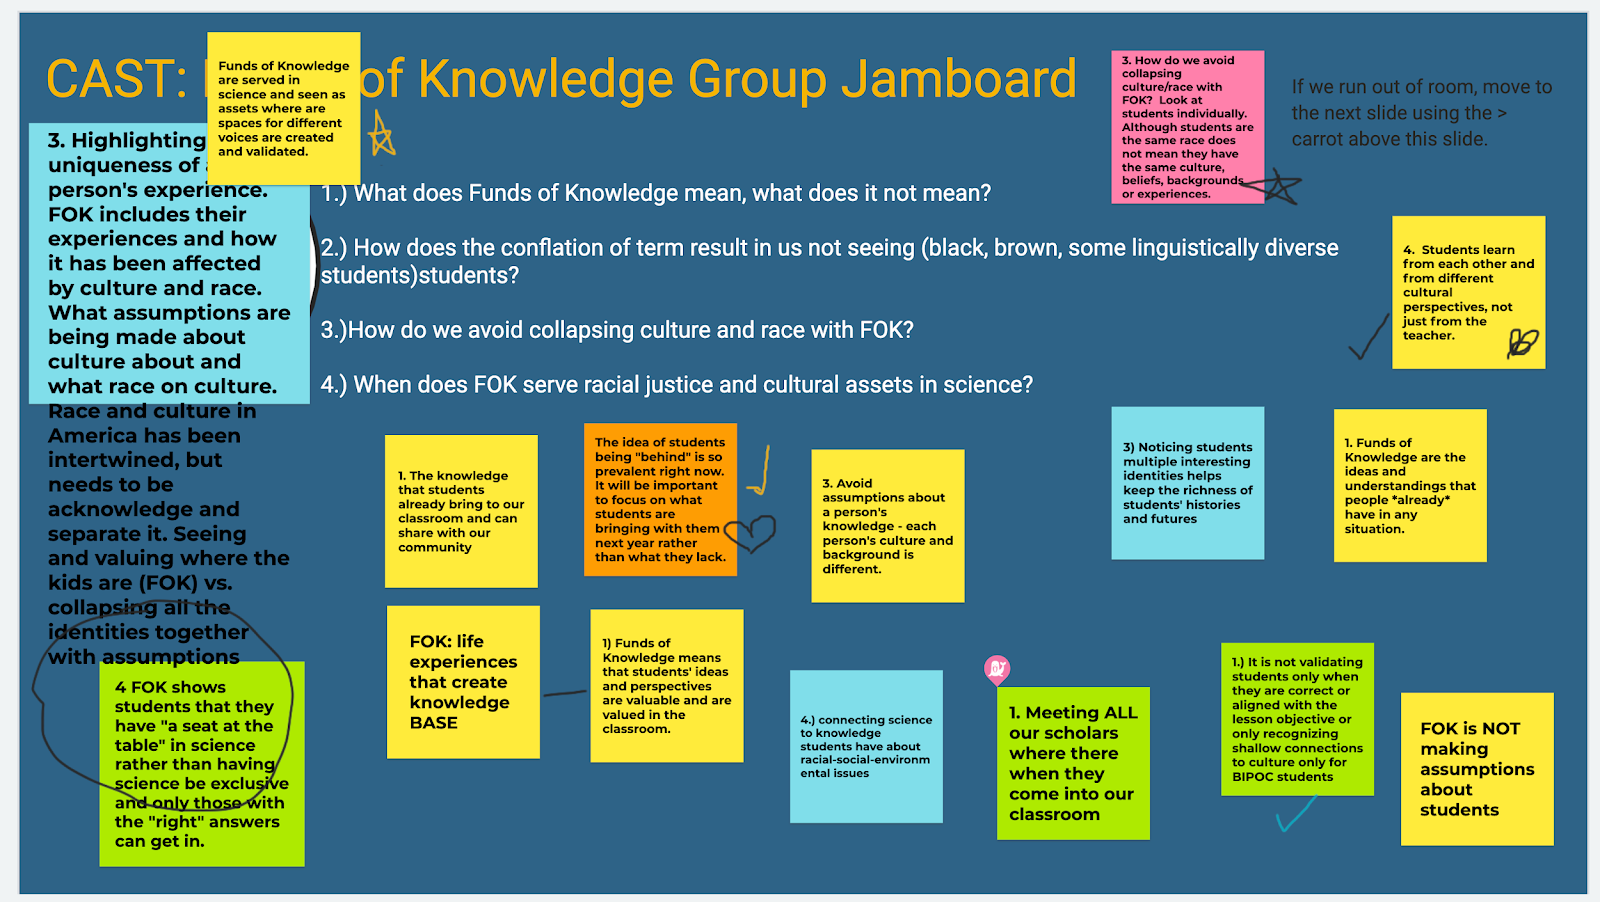 the teachers asked questions about their own assumptions about students’ capabilities. In the jam board activity, they questioned the language often used to describe students as “behind.” In this example of the funds of knowledge group Jamboard, four questions are asked and responses are shown on sticky notes. The four questions asked are: 1. What does Funds of Knowledge mean, what does it not mean? 2. How does the conflation of term result in us not seeing (black, brown, some linguistically diverse students) students? 3. How do we avoid collapsing culture and race with FOK? 4. When does FOK serve racial justice and cultural assets in science? 